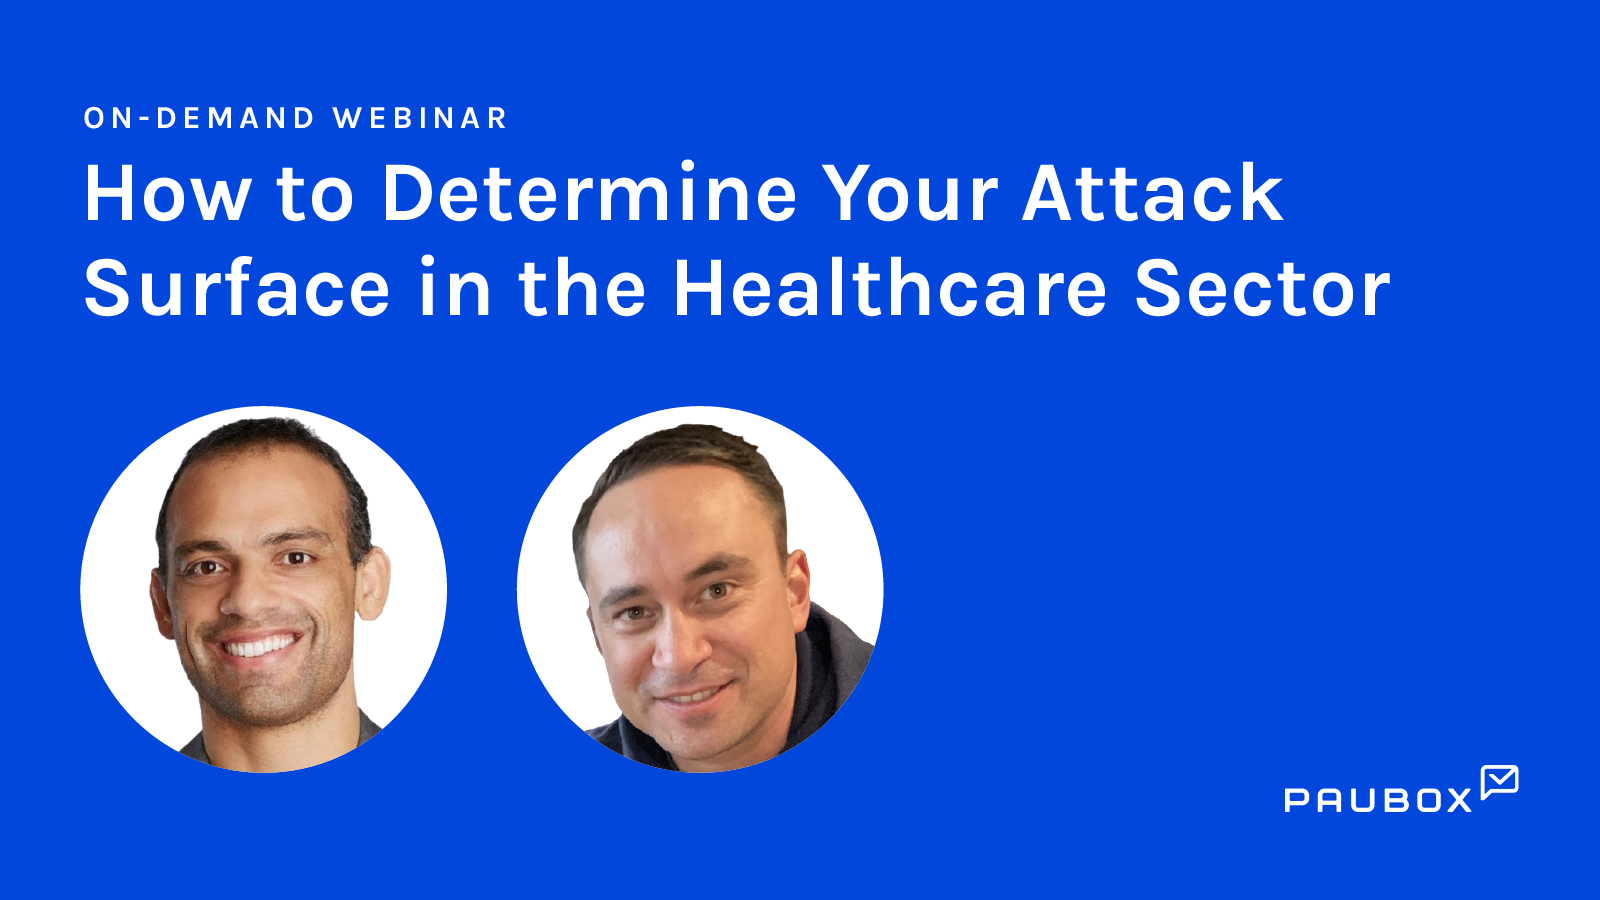 How to determine your attack surface in the healthcare sector